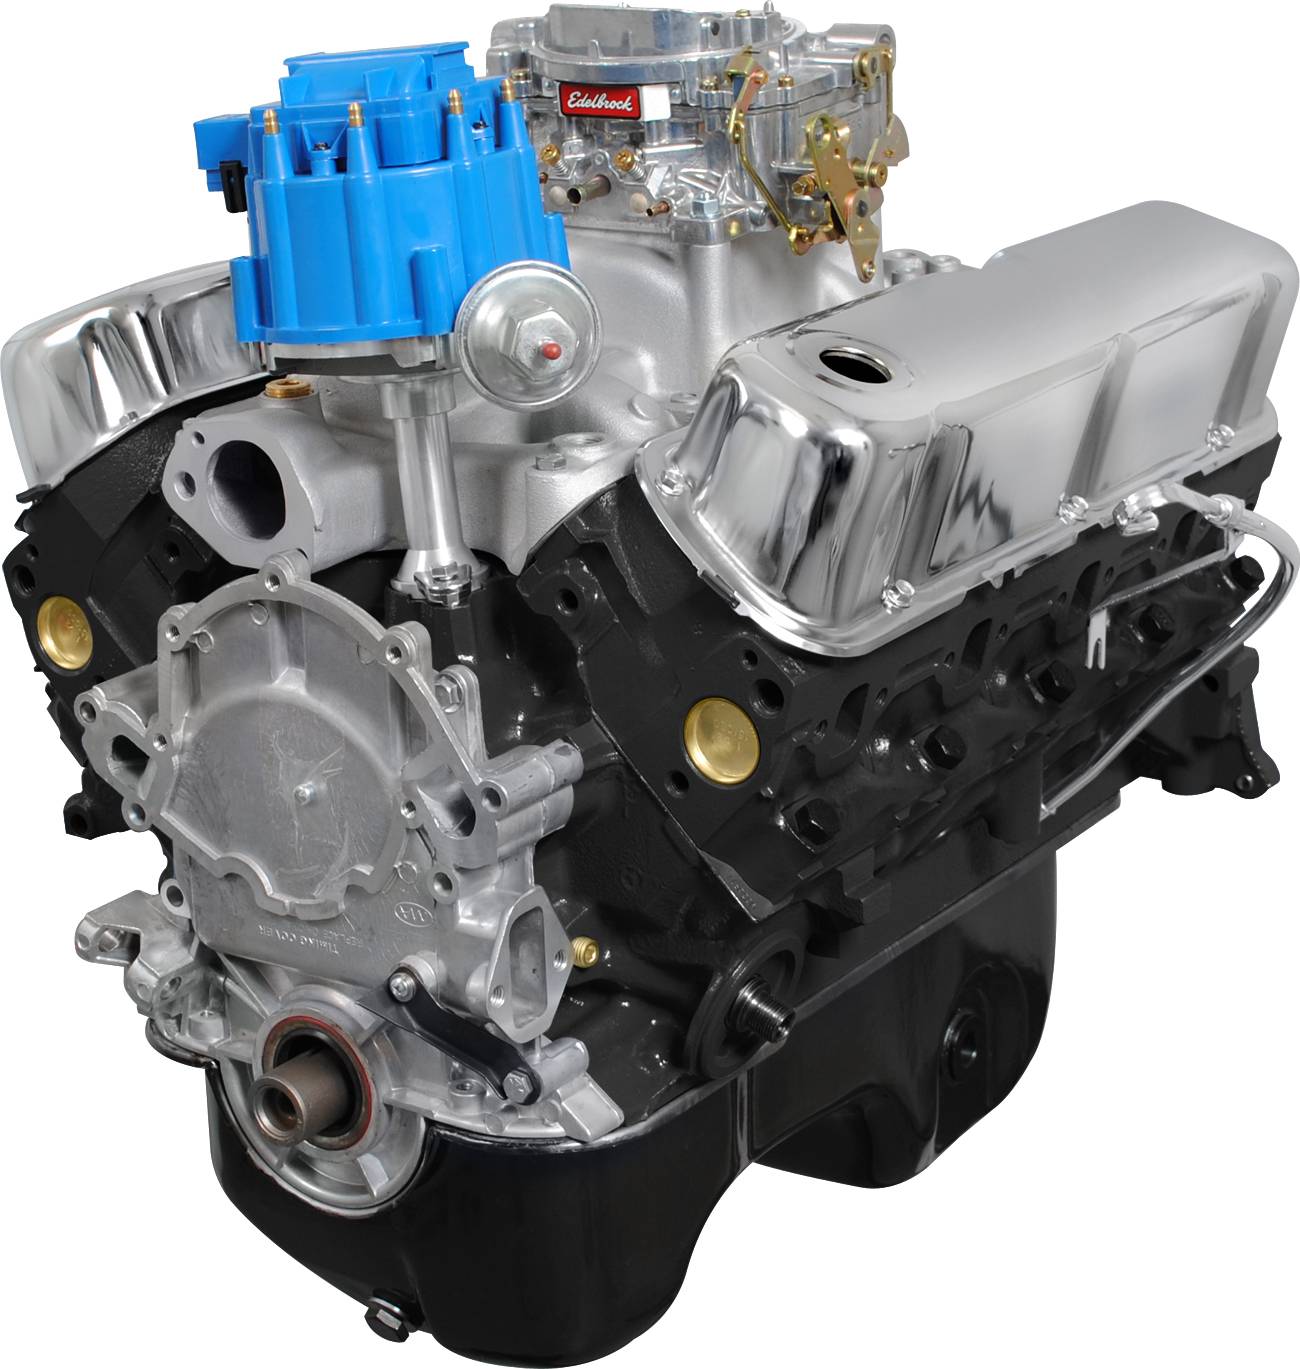 BP3314CTC - BluePrint Engines Ford 331CID 330HP Crate Engine